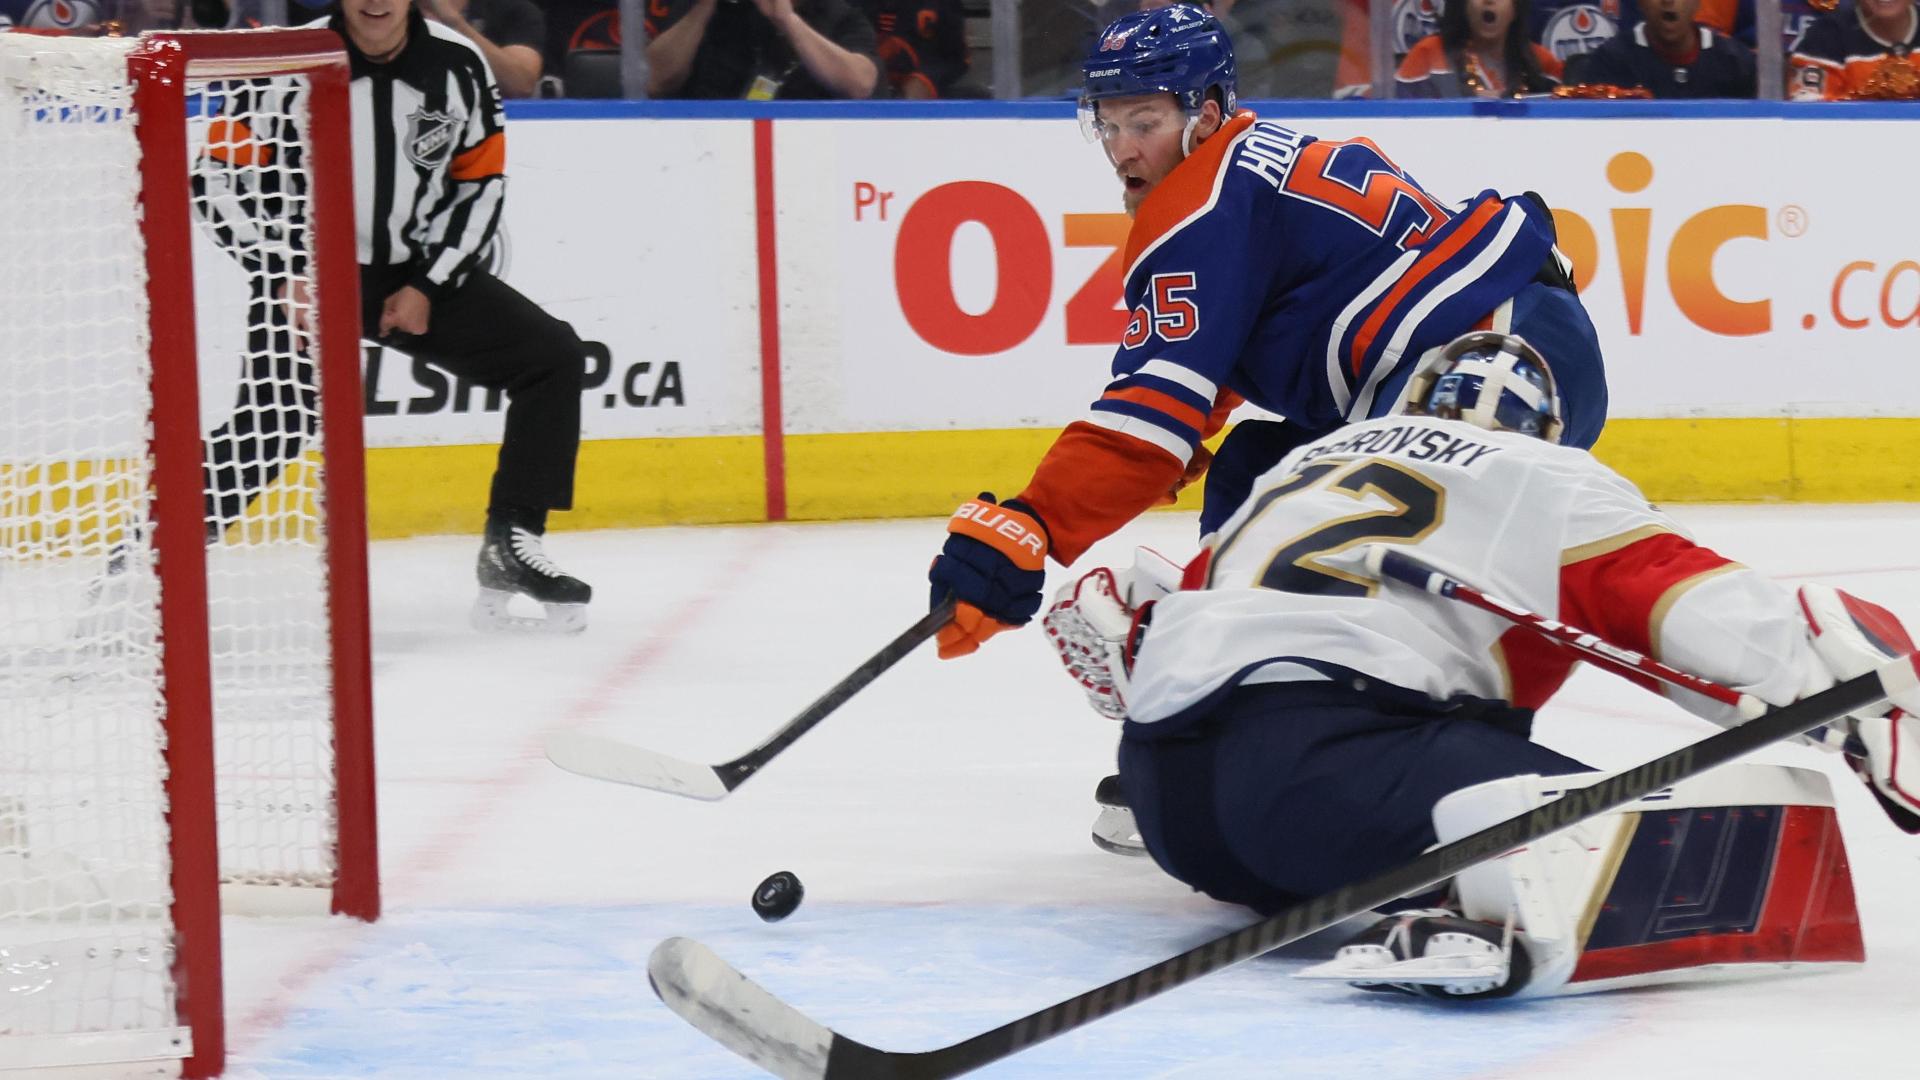 Crowd erupts as Dylan Holloway's goal gives Oilers a 3-1 lead